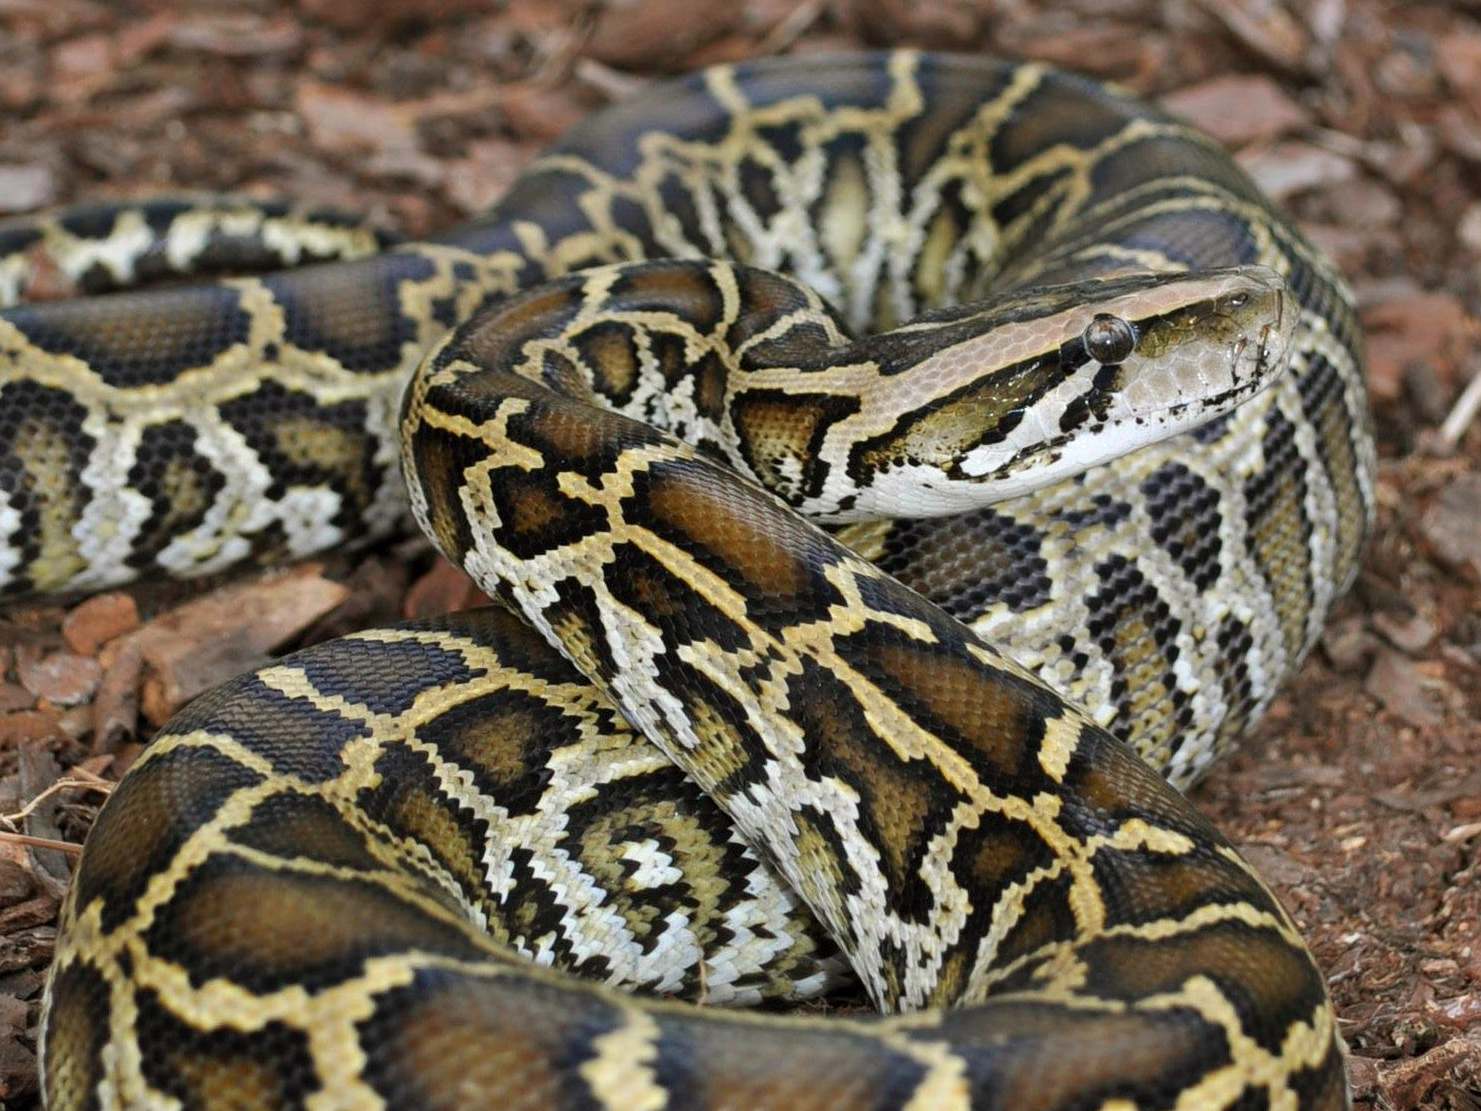 Monty's a good snake, aren't you?': Is the way pythons control their own  genes the future of medicine? | The Independent | The Independent